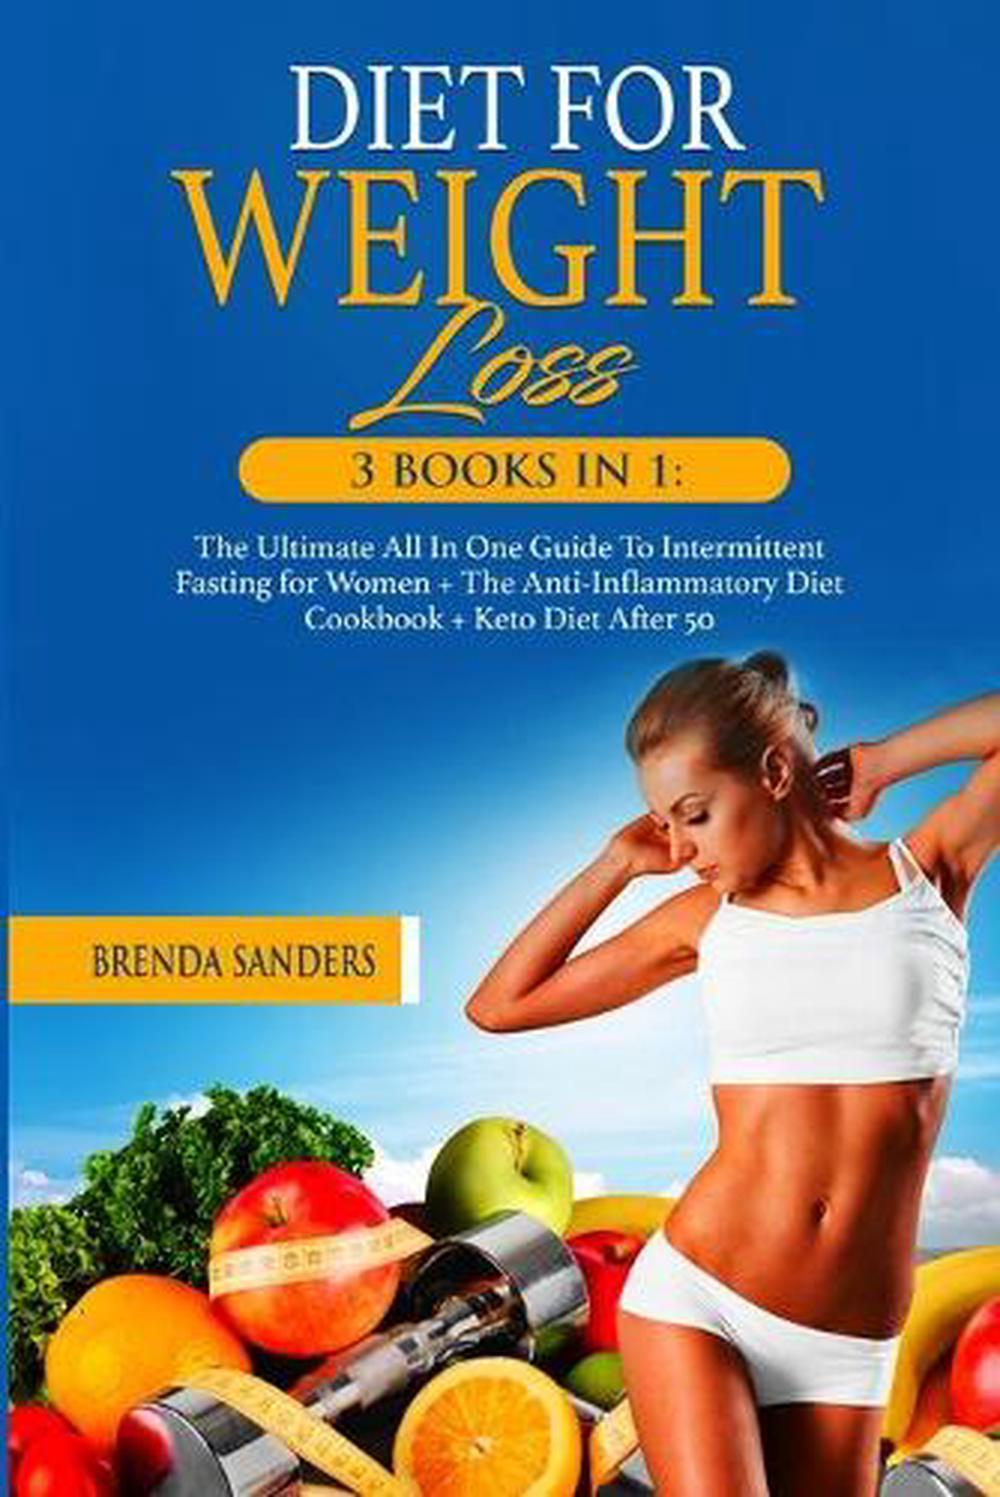 Diet for Weight Loss: 3 BOOKS in 1: the Ultimate All in One Guide to